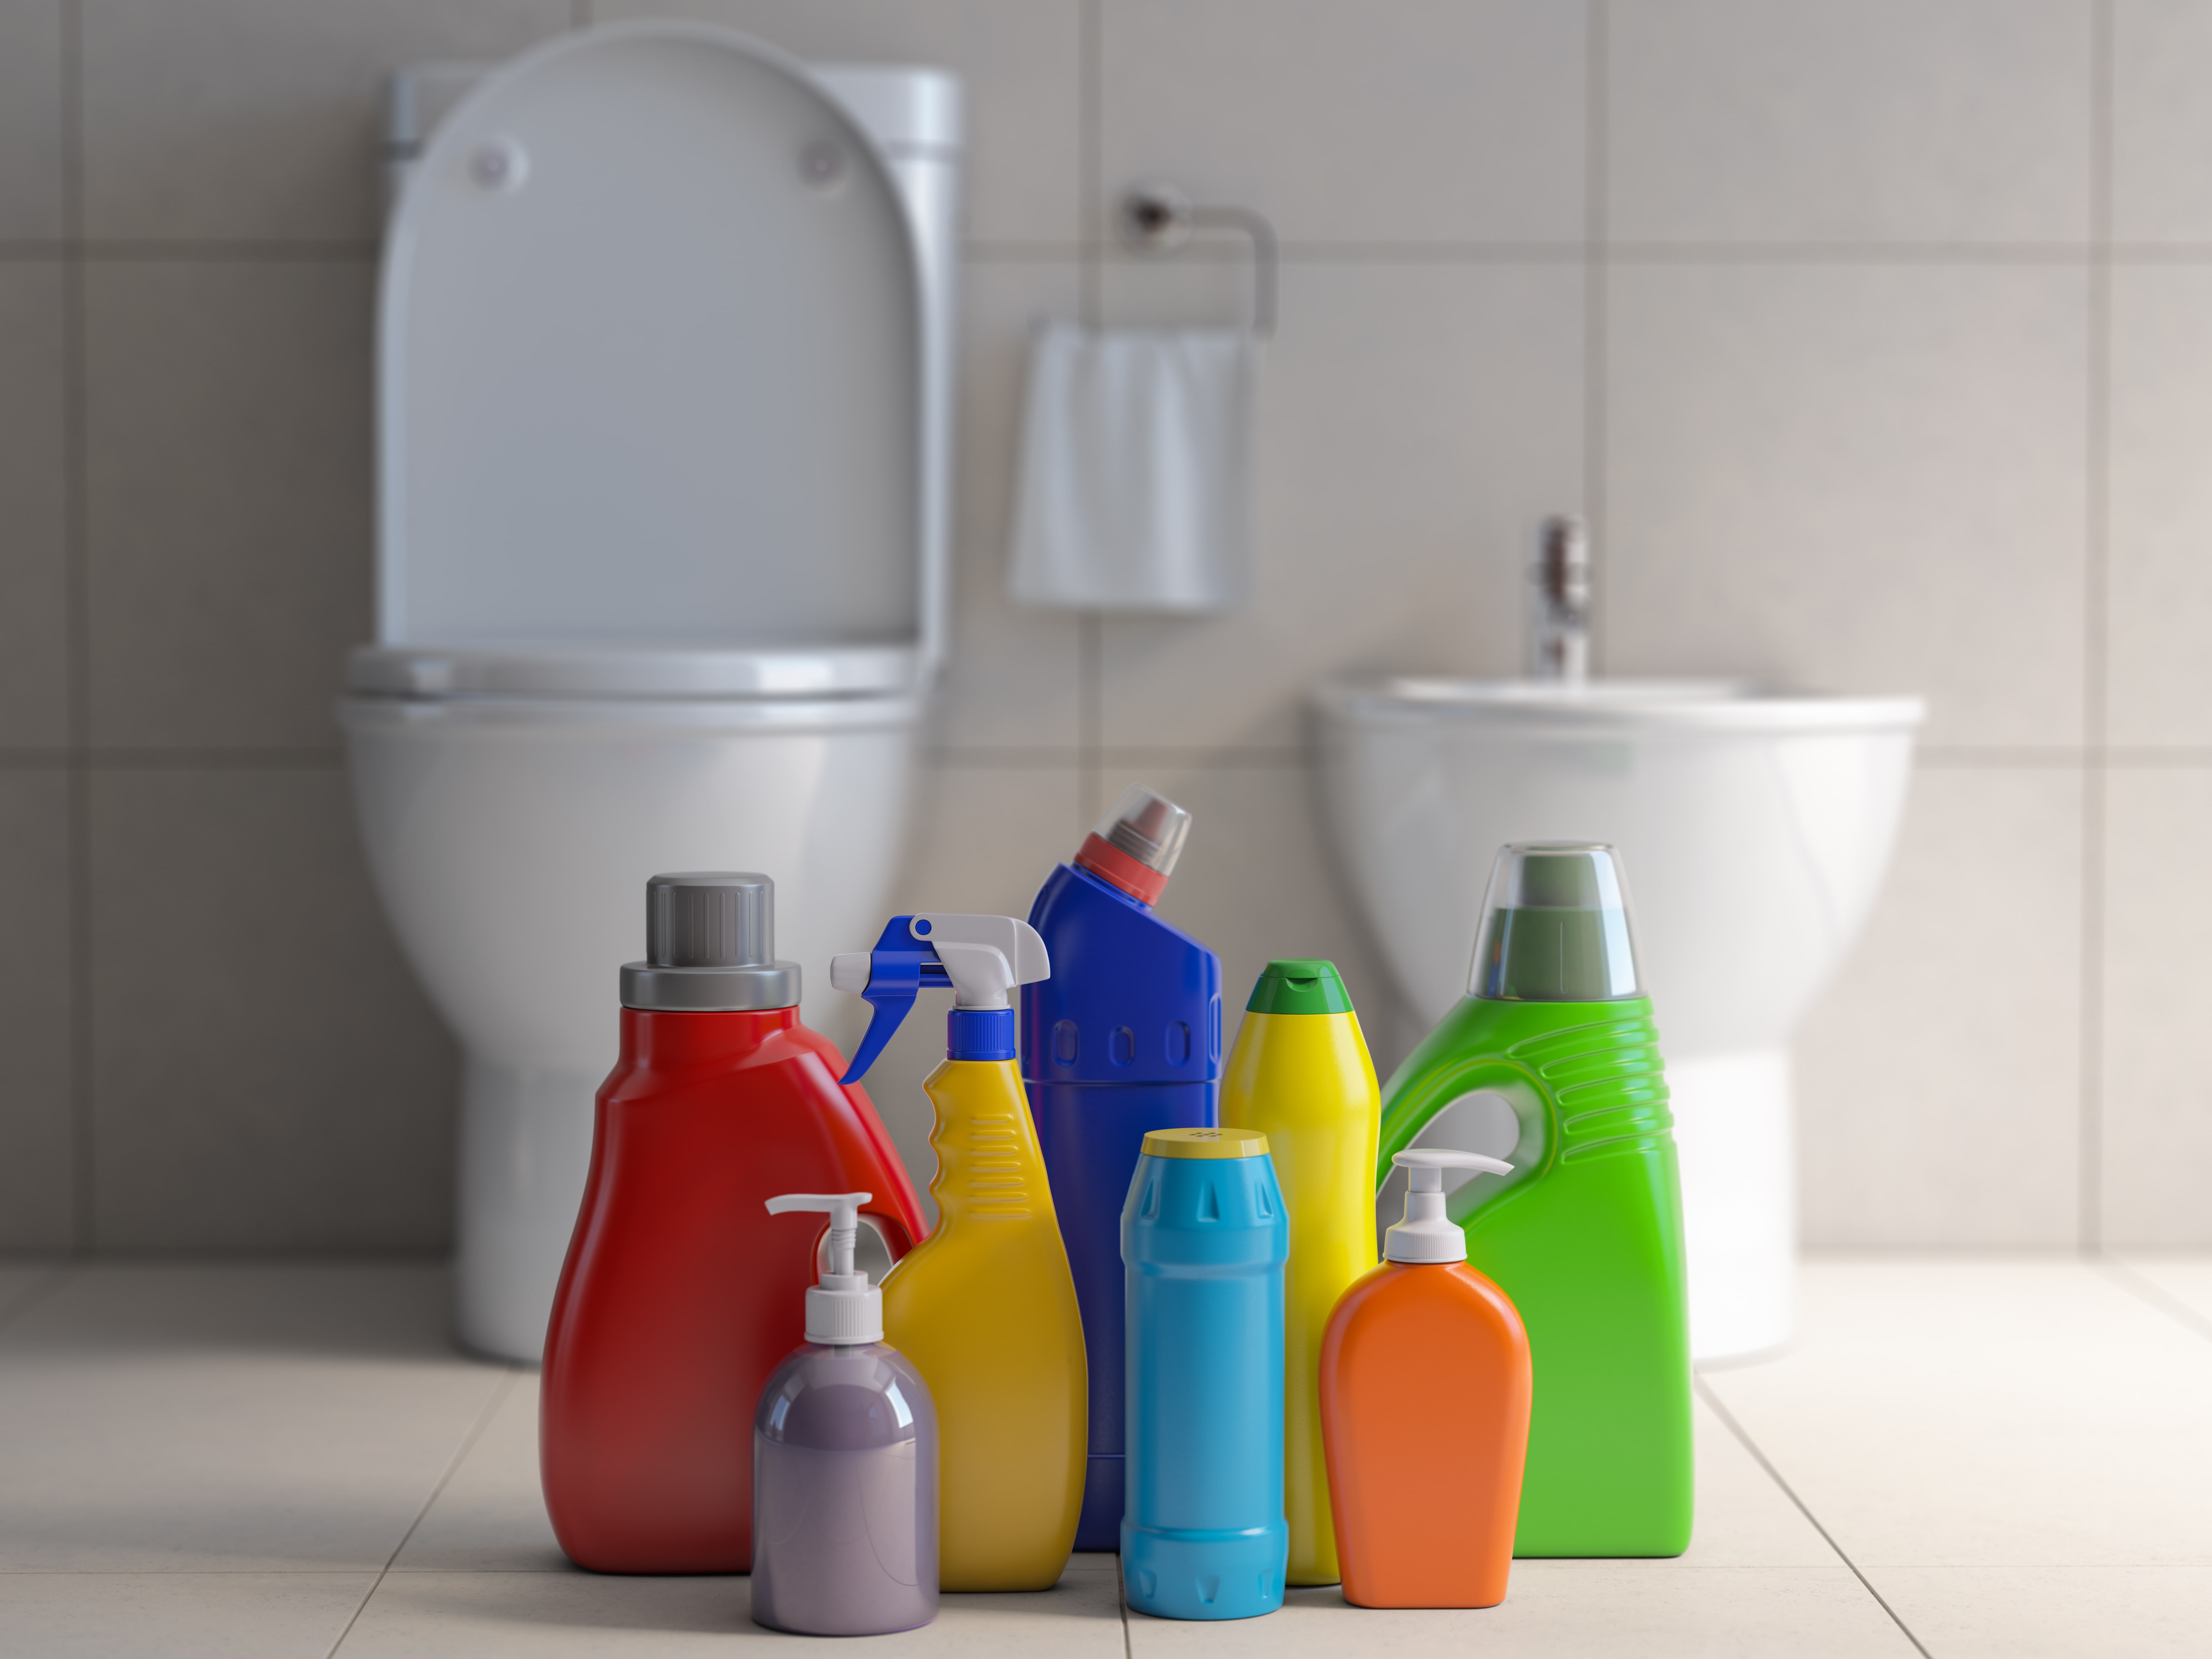 detergent-bottles-and-containers-cleaning-GVNLDU7-min